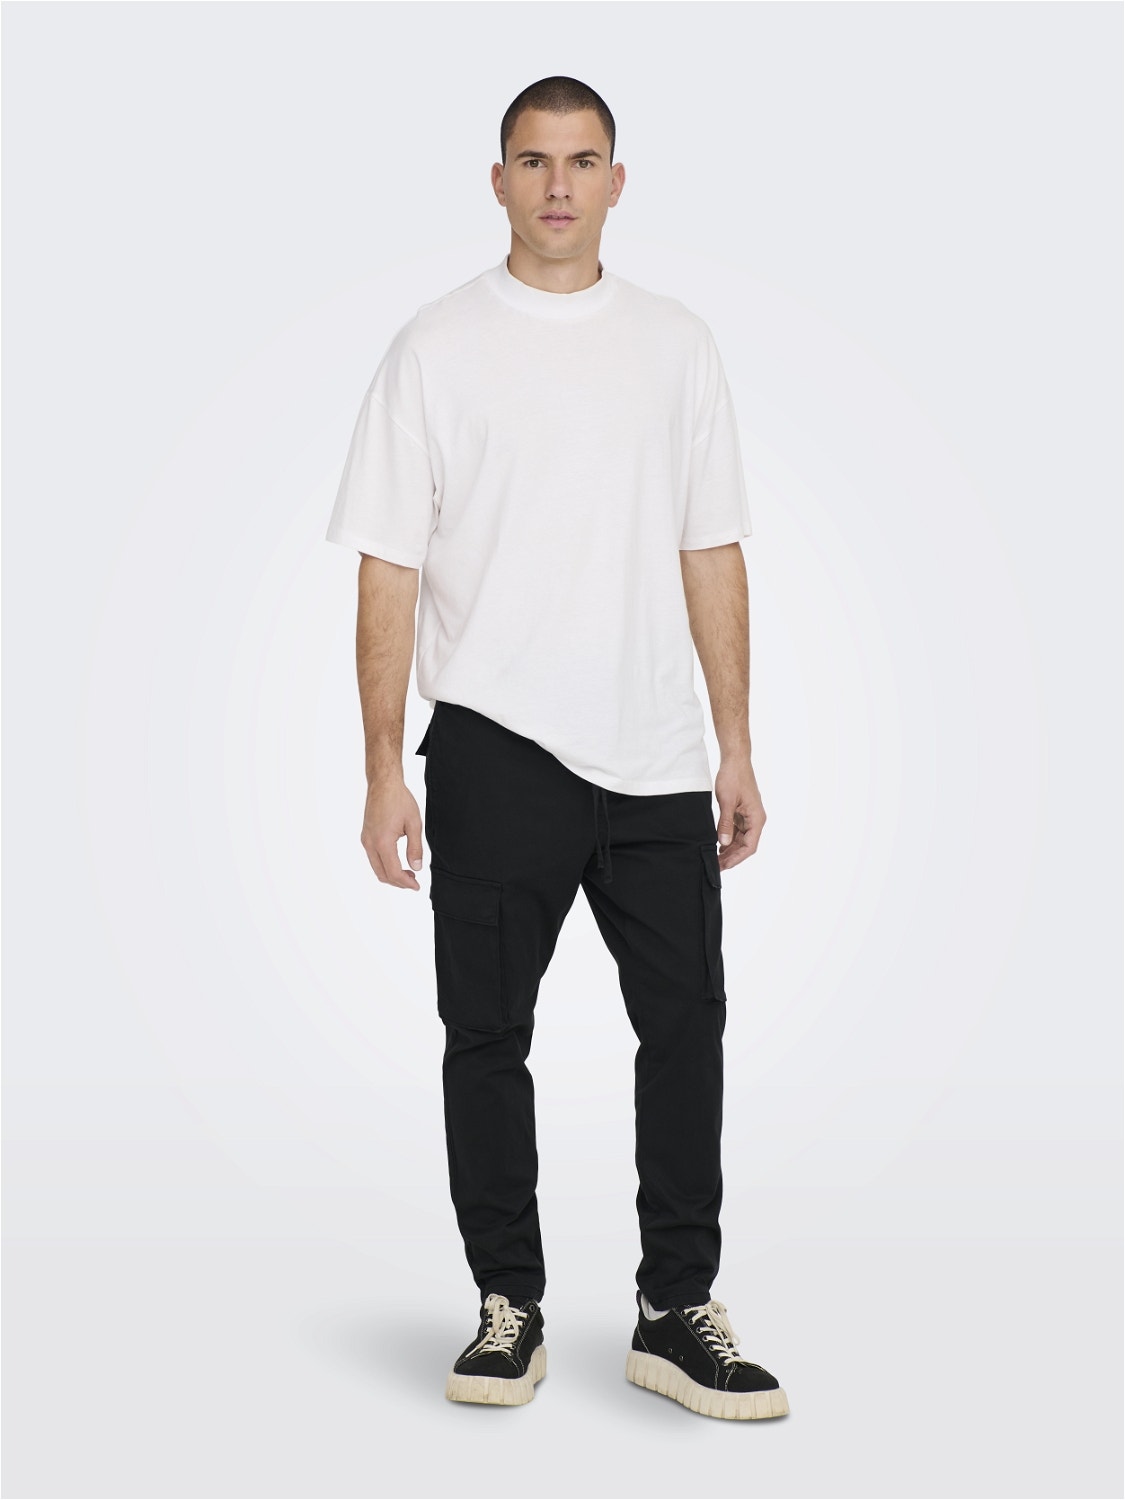 ONLY & SONS Tapered Fit Trousers -Black - 22022366